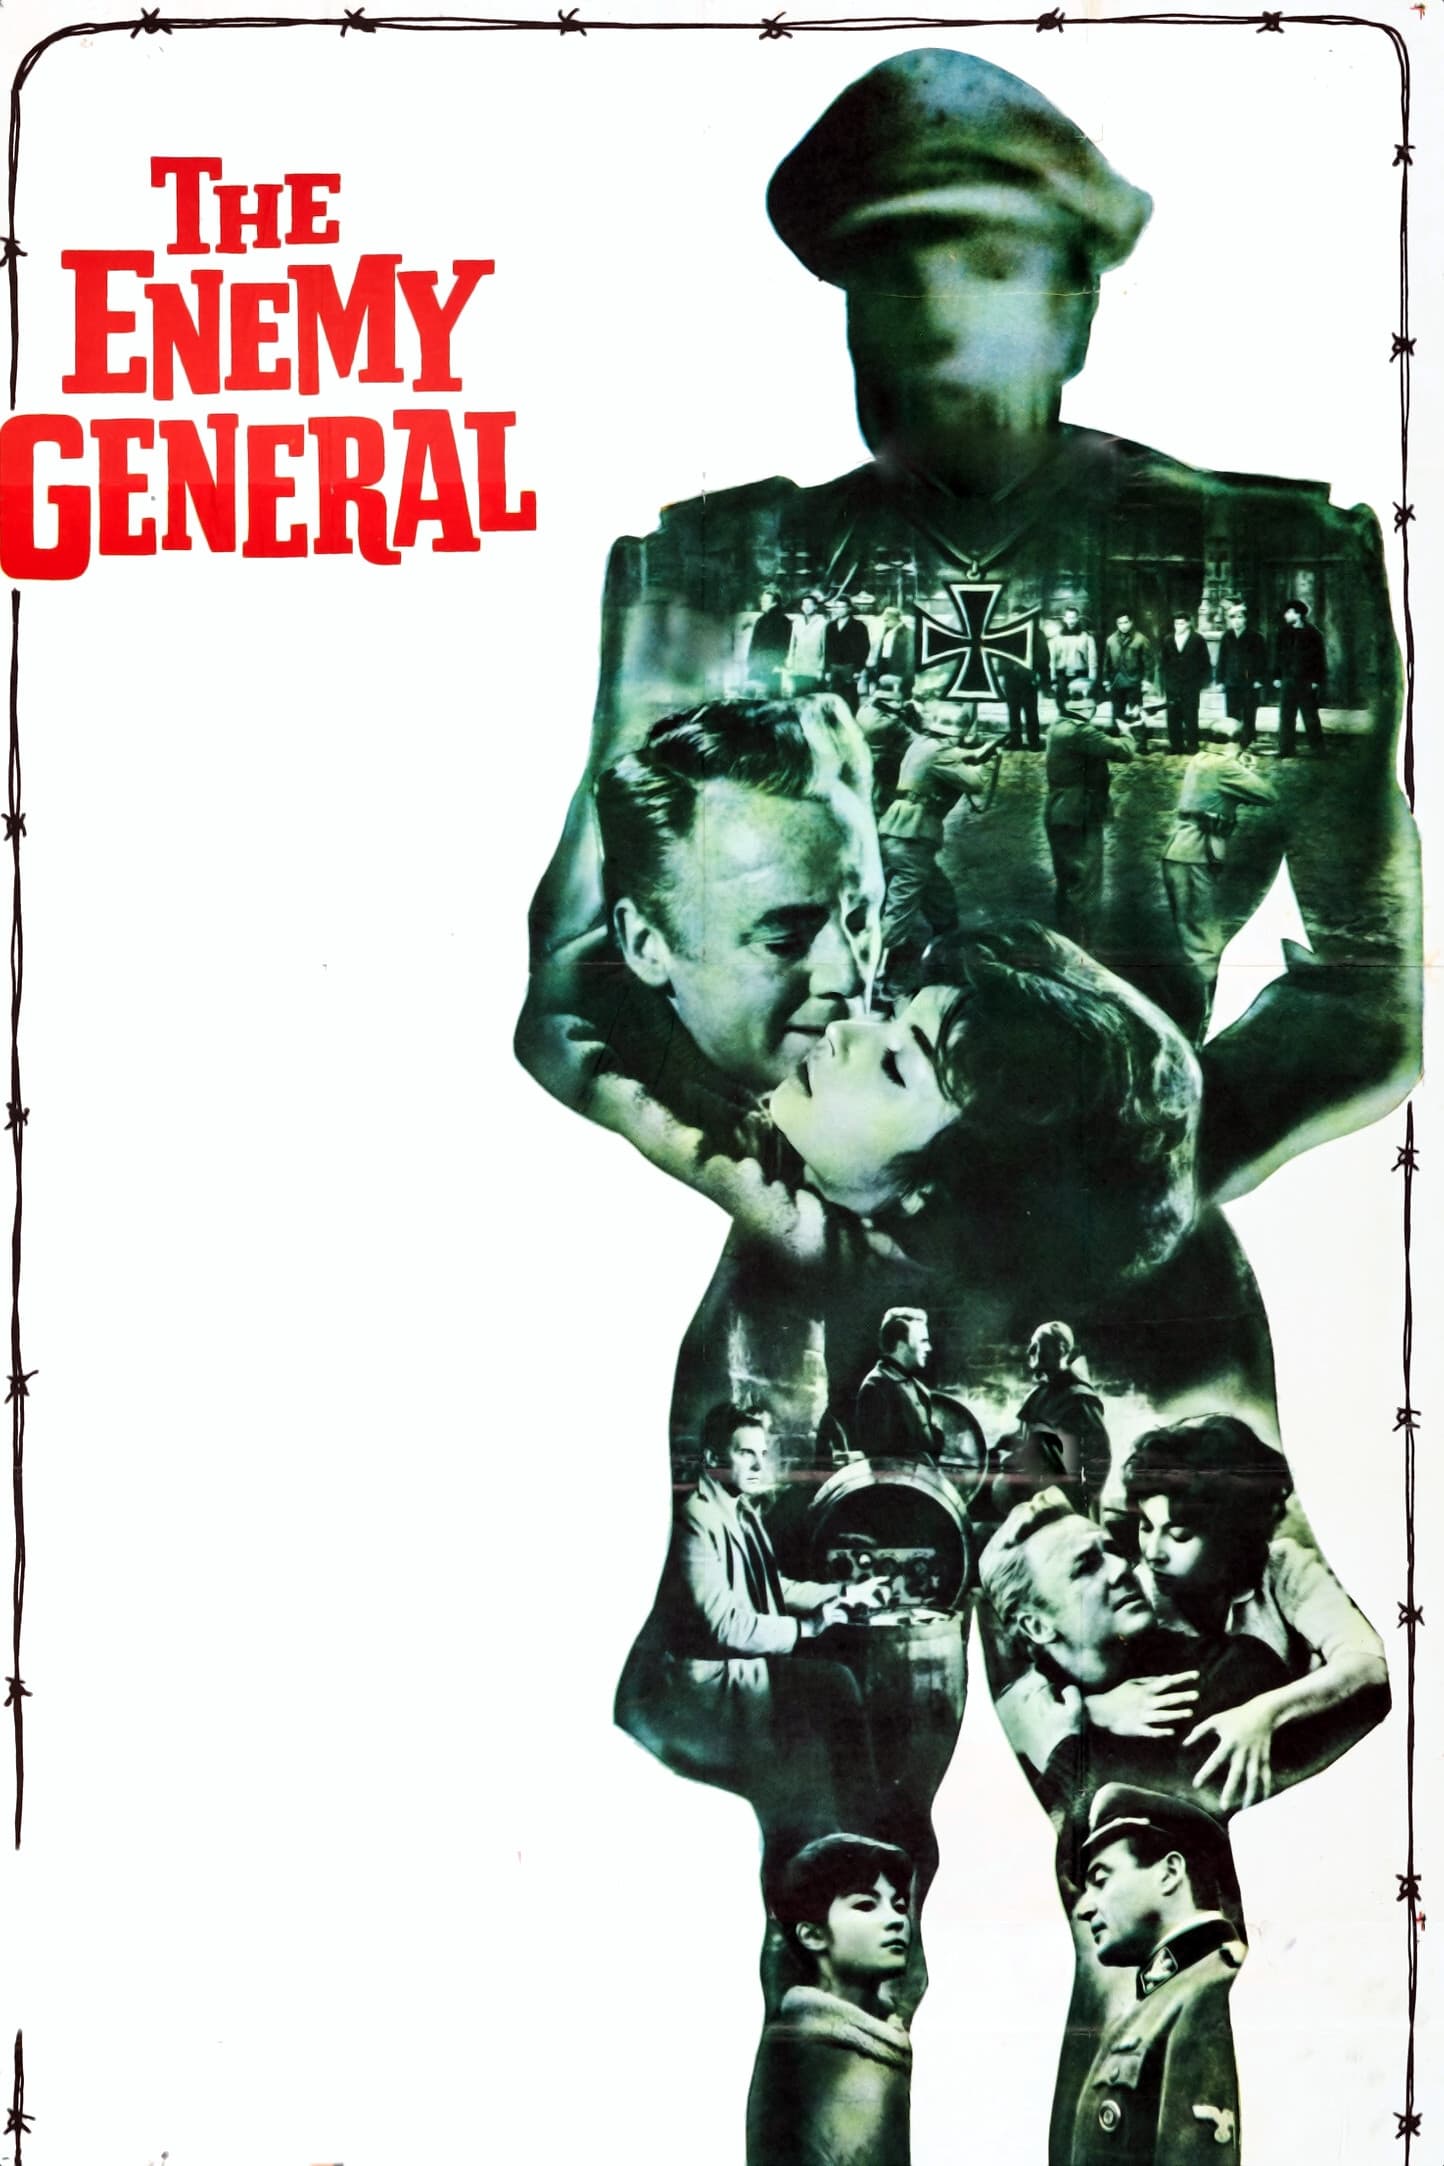 The Enemy General (1960)